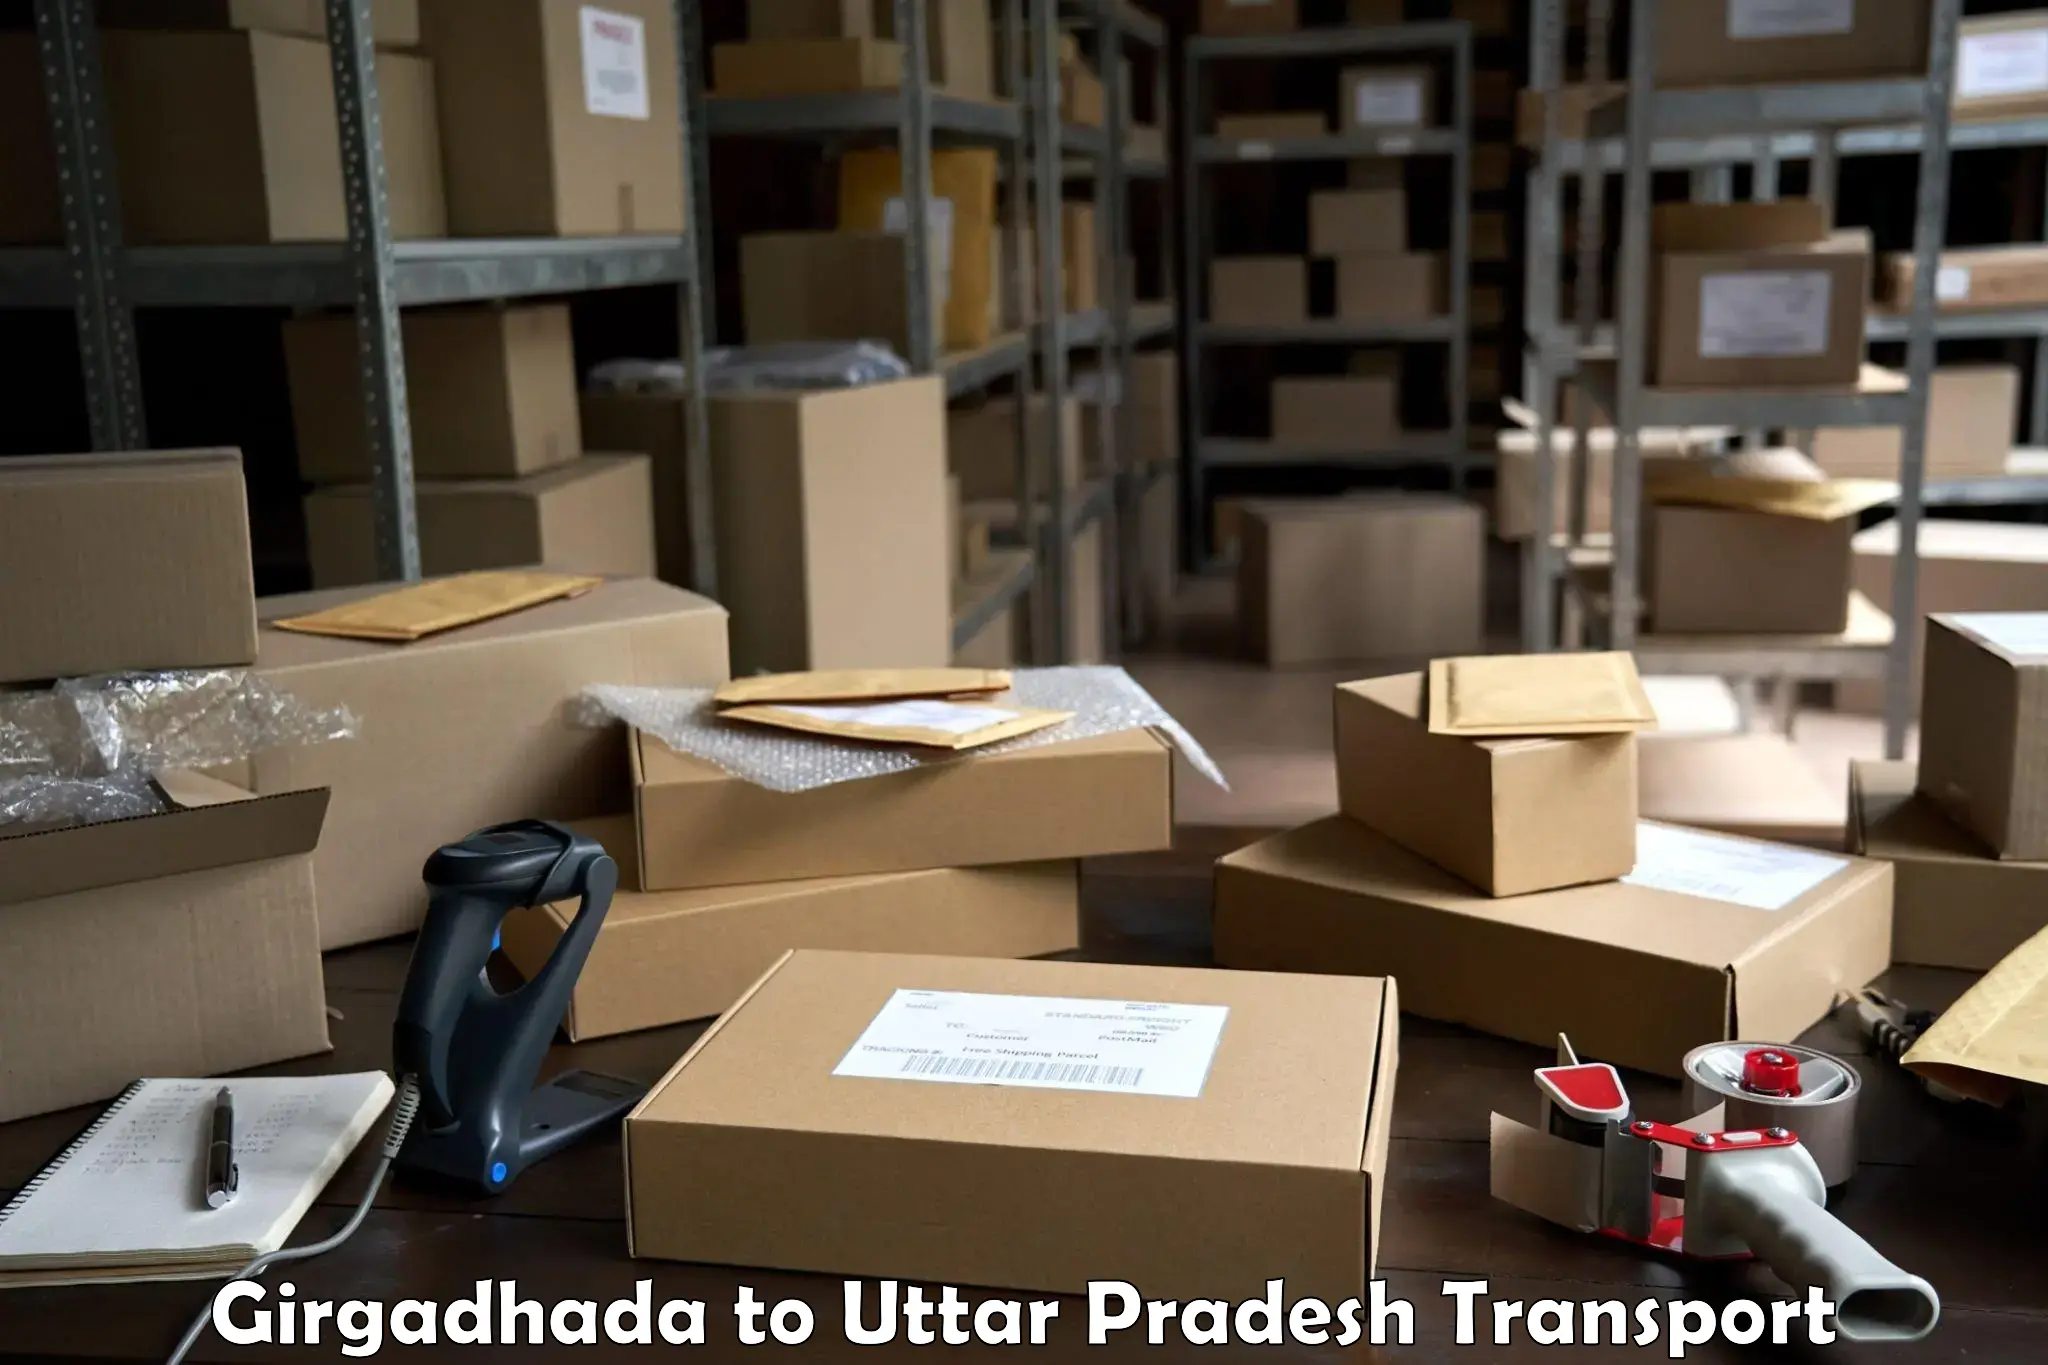 Package delivery services Girgadhada to Saifai